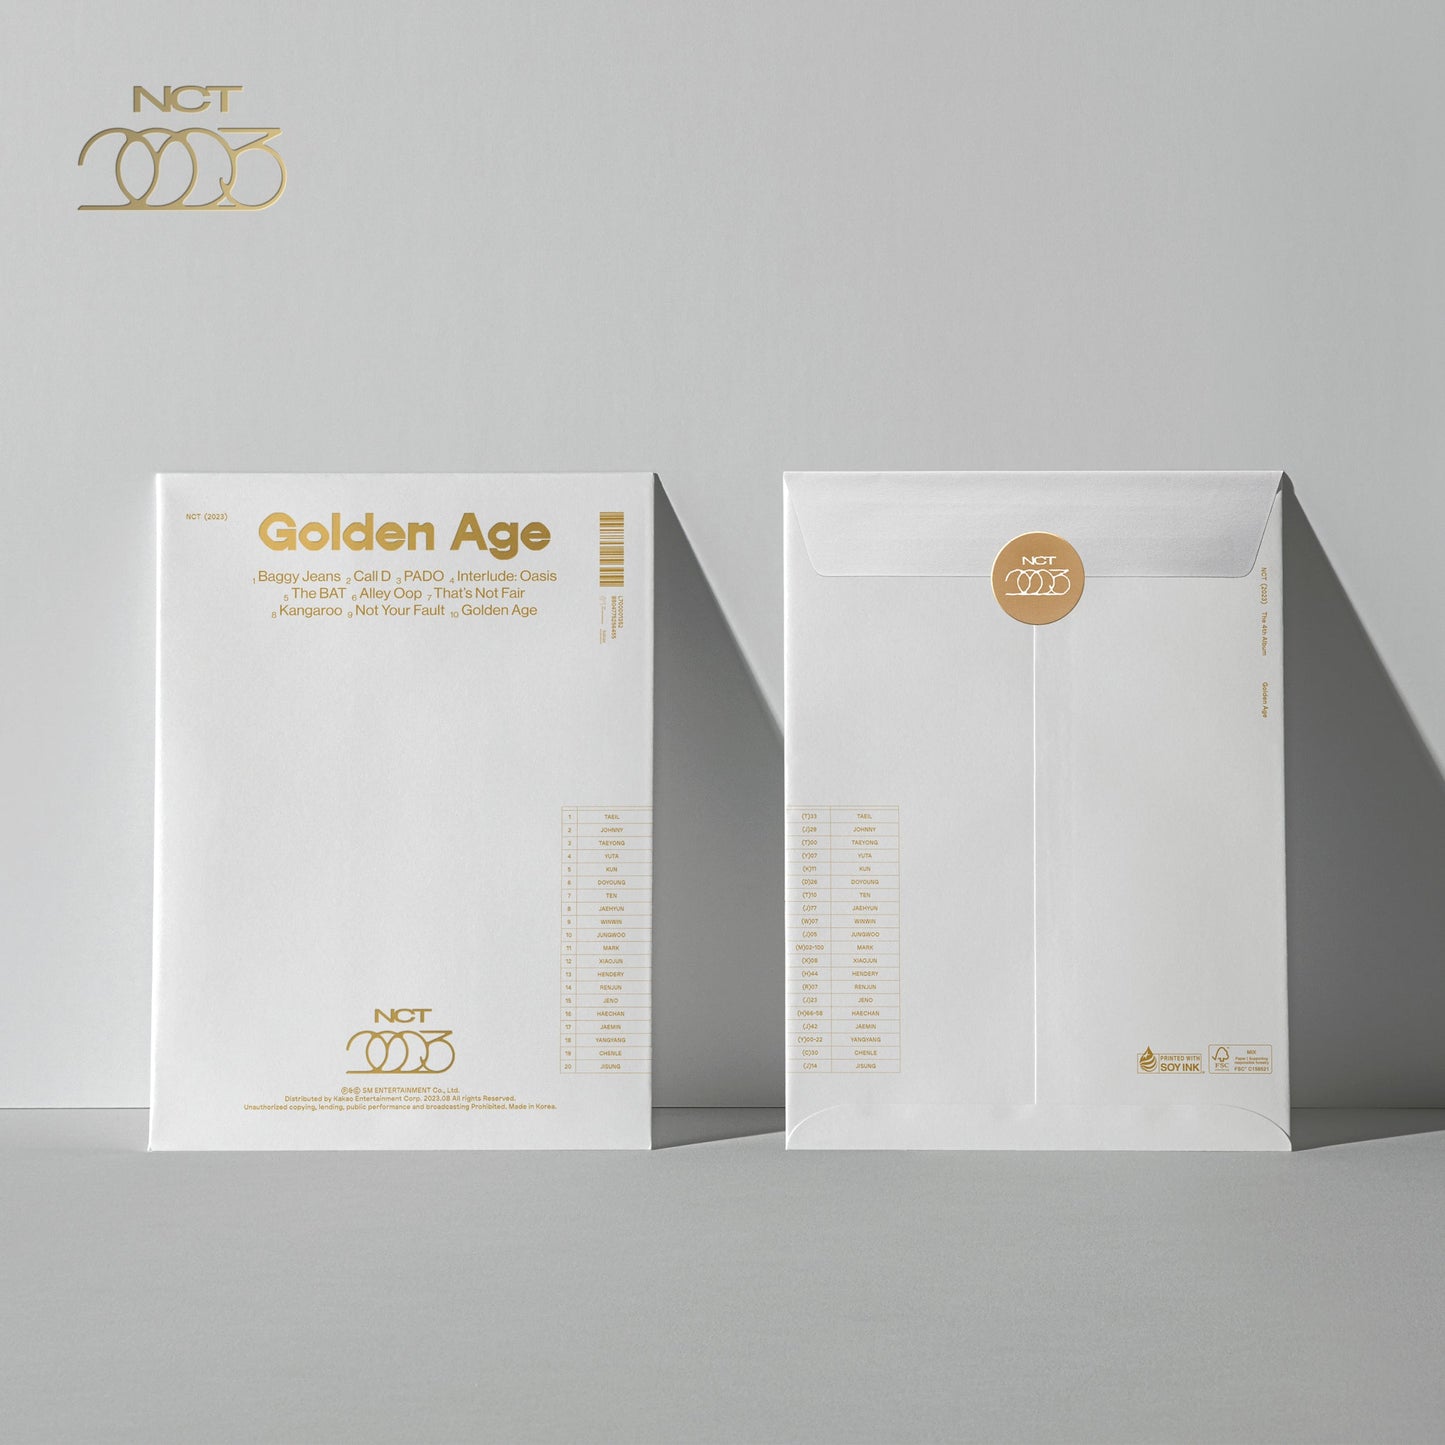 NCT 4TH ALBUM 'GOLDEN AGE' COLLECTING VERSION COVER